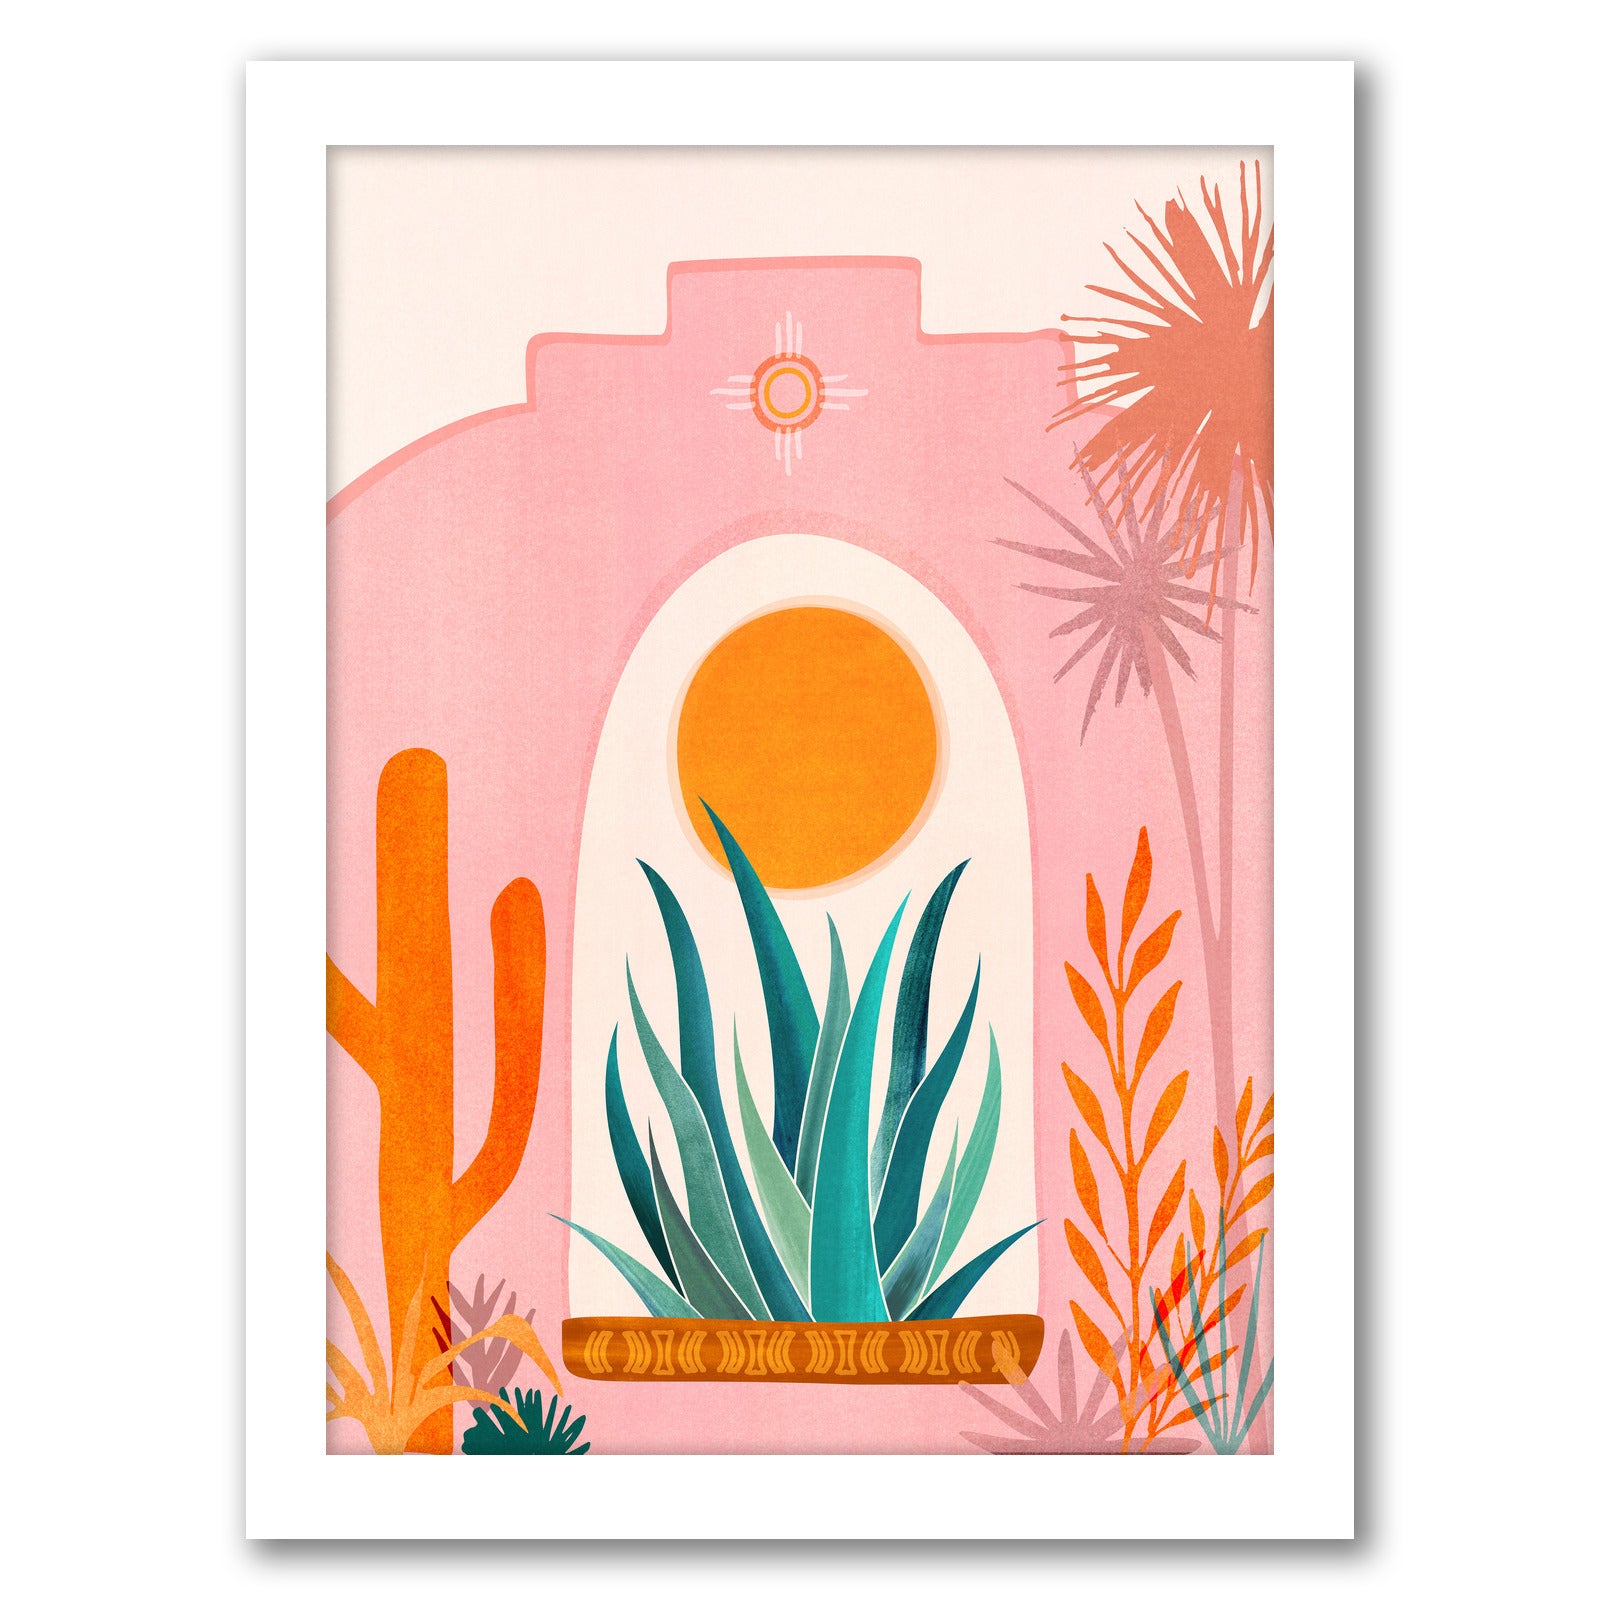 A New Day Begins by Modern Tropical - Framed Print - Americanflat